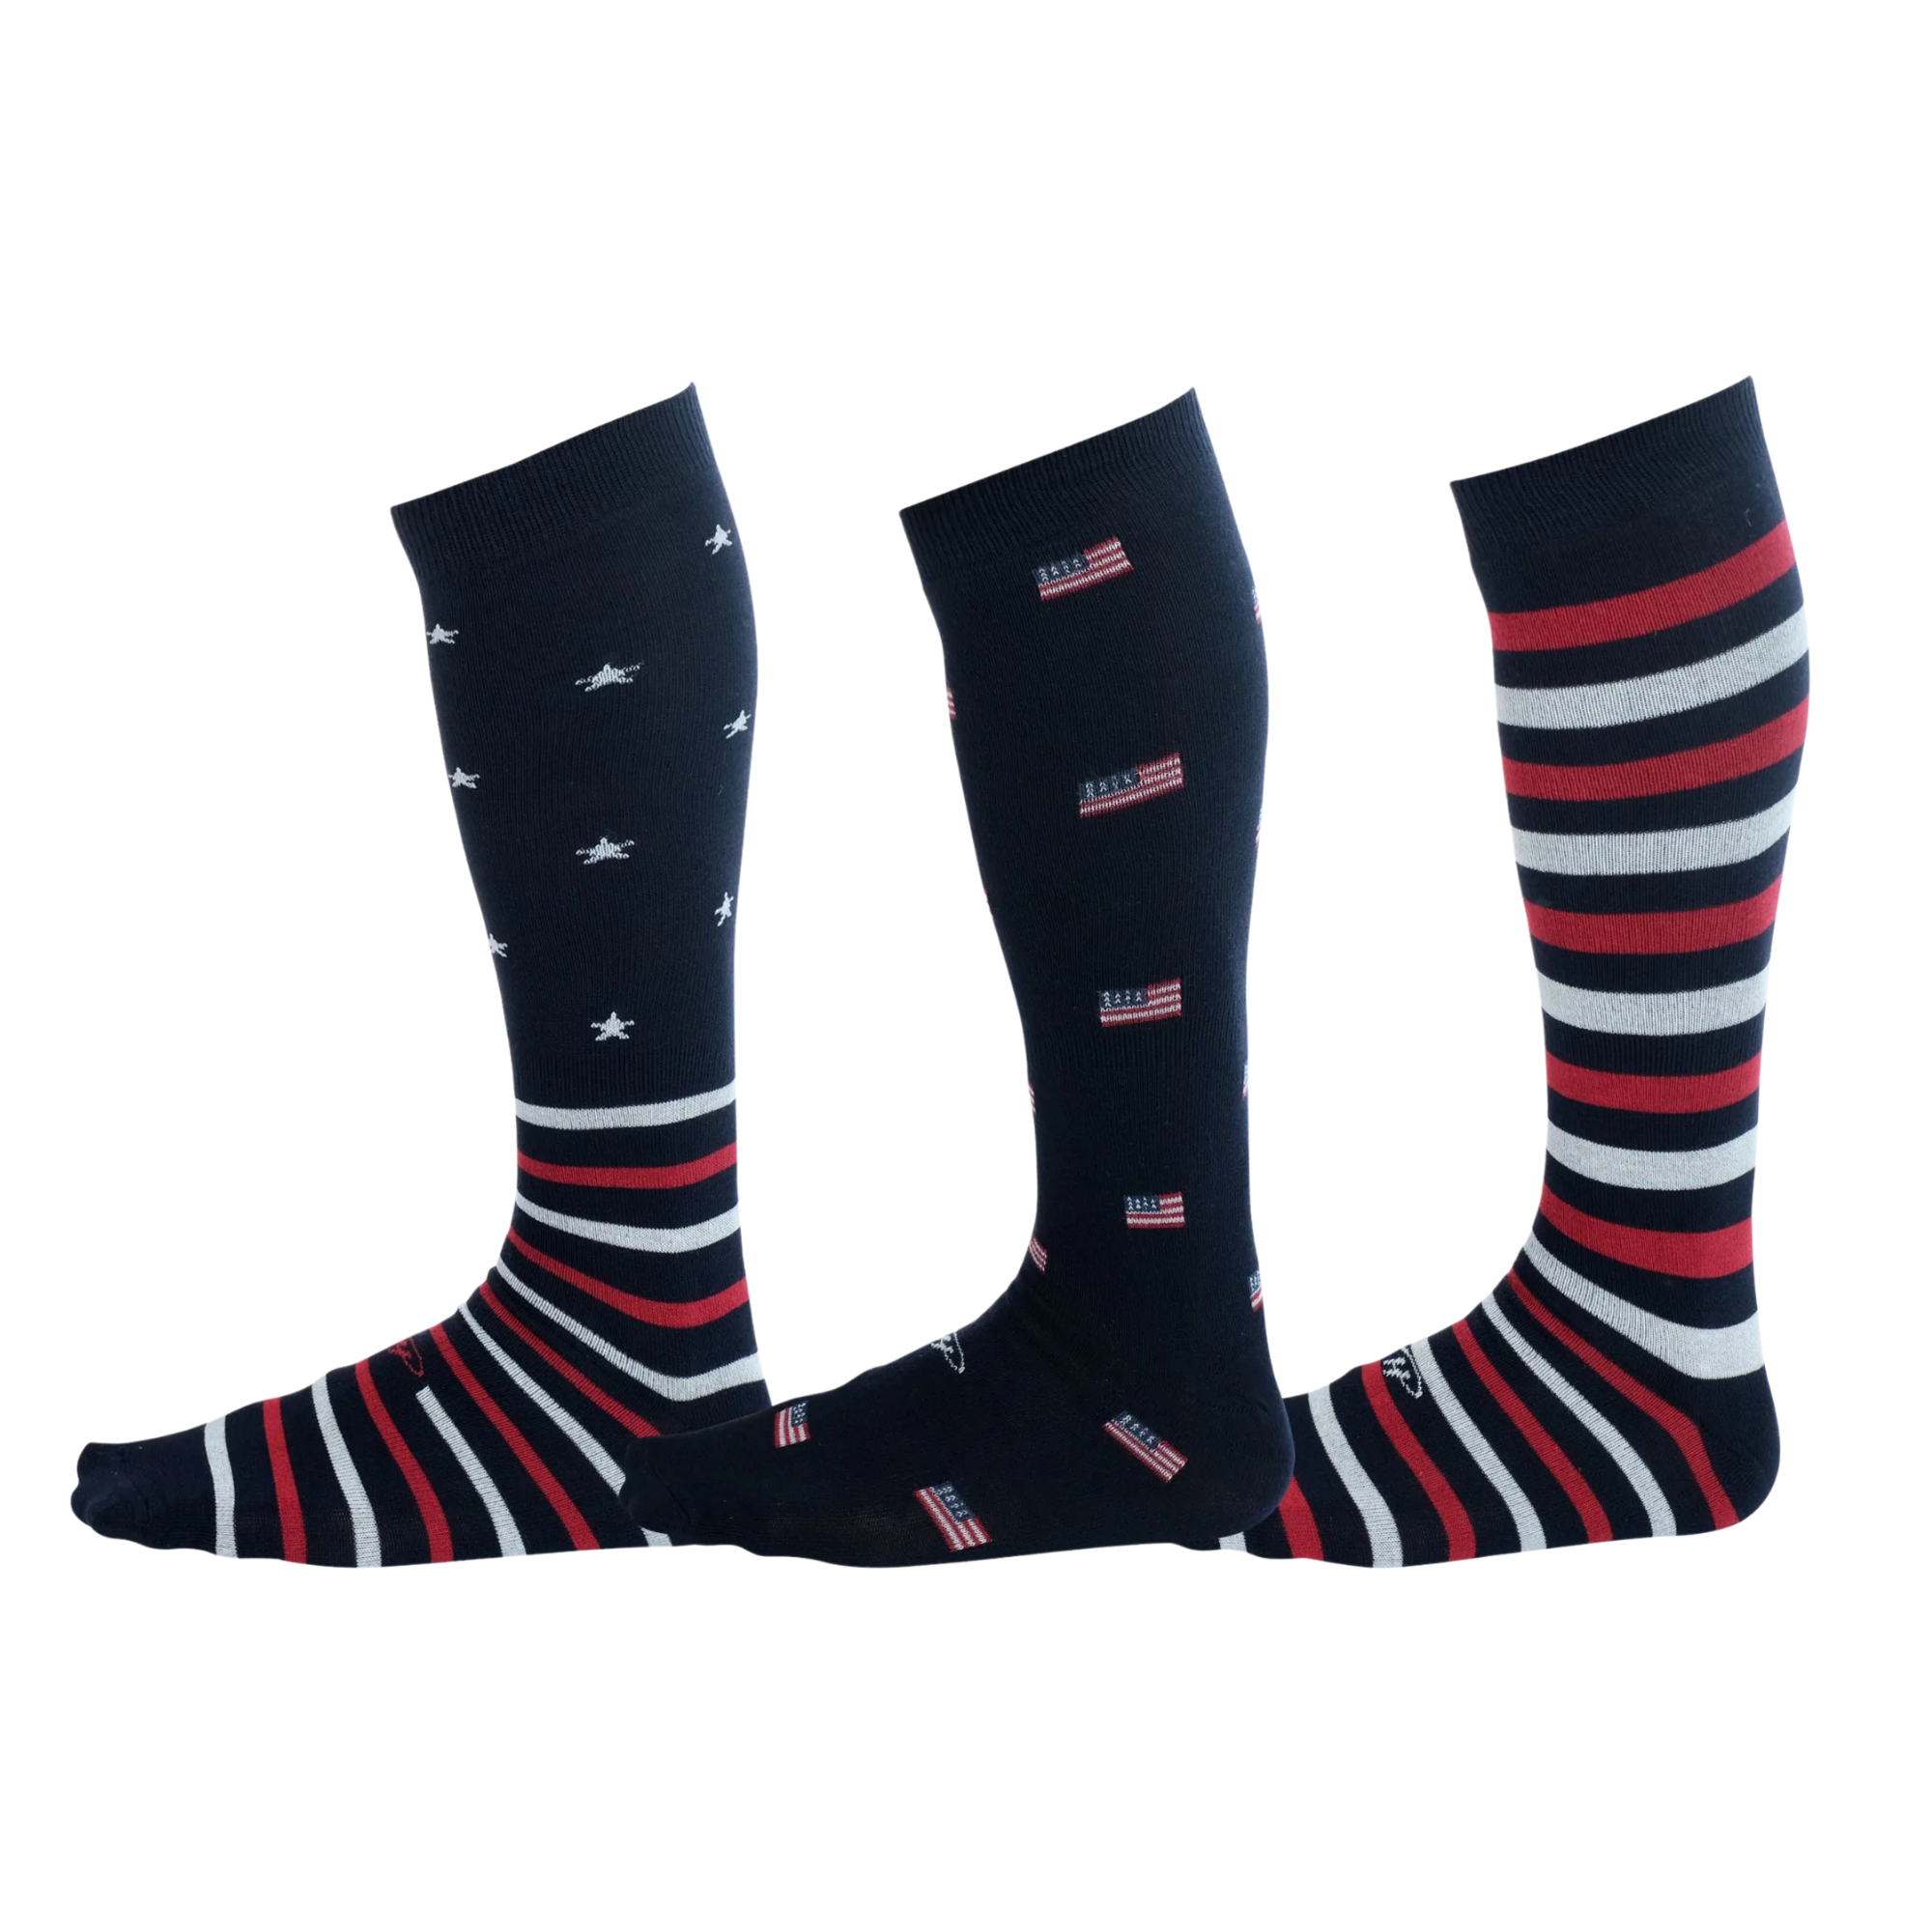 navy dress socks with white stars and red and white stripes, American flag navy dress socks, navy dress socks with red and white stripes